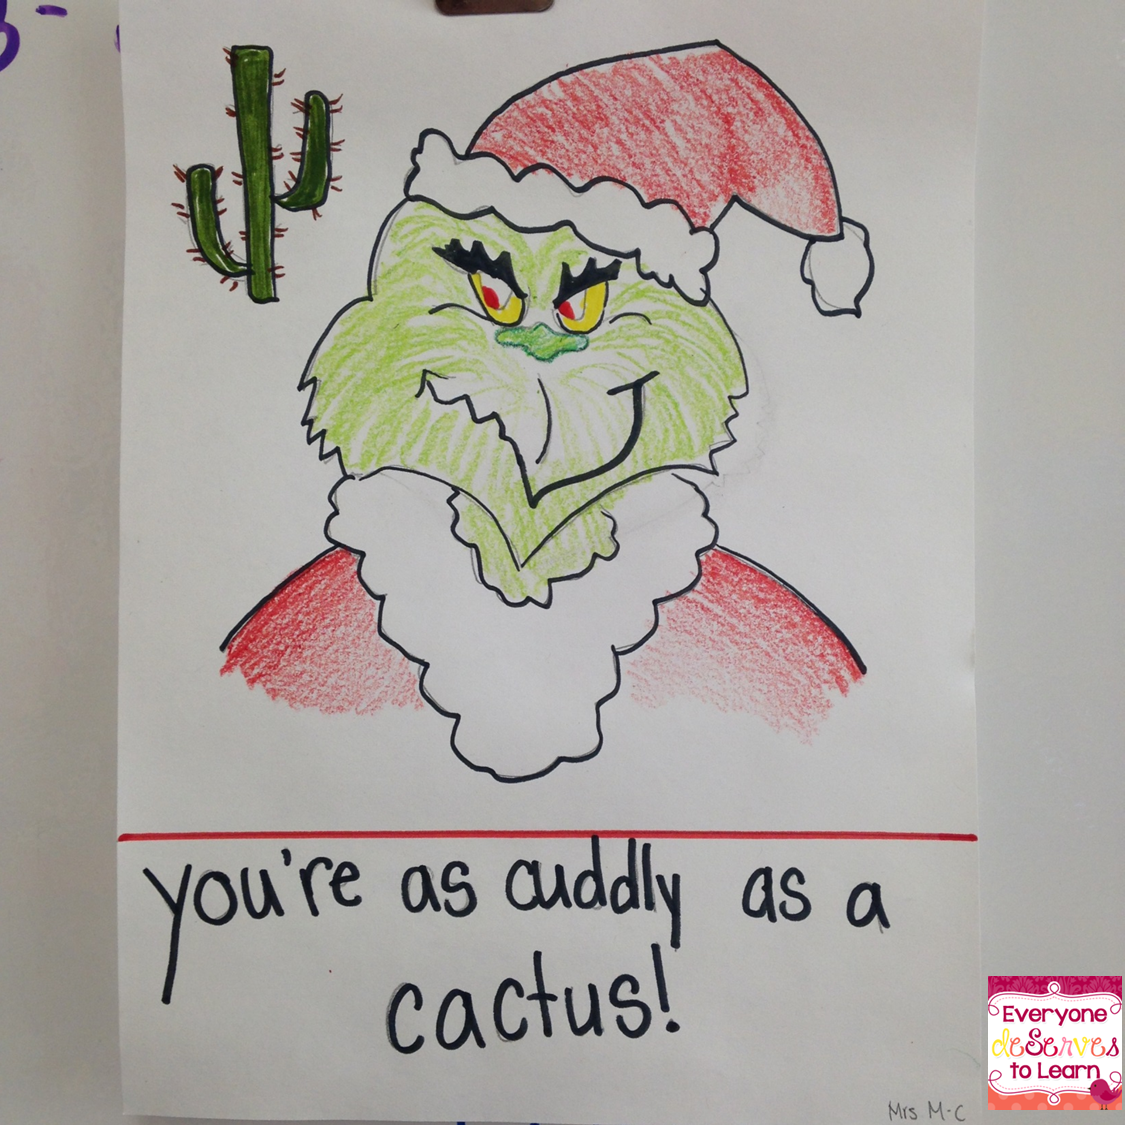 Teaching Simile and Metaphor with the Grinch | Everyone Deserves to Learn